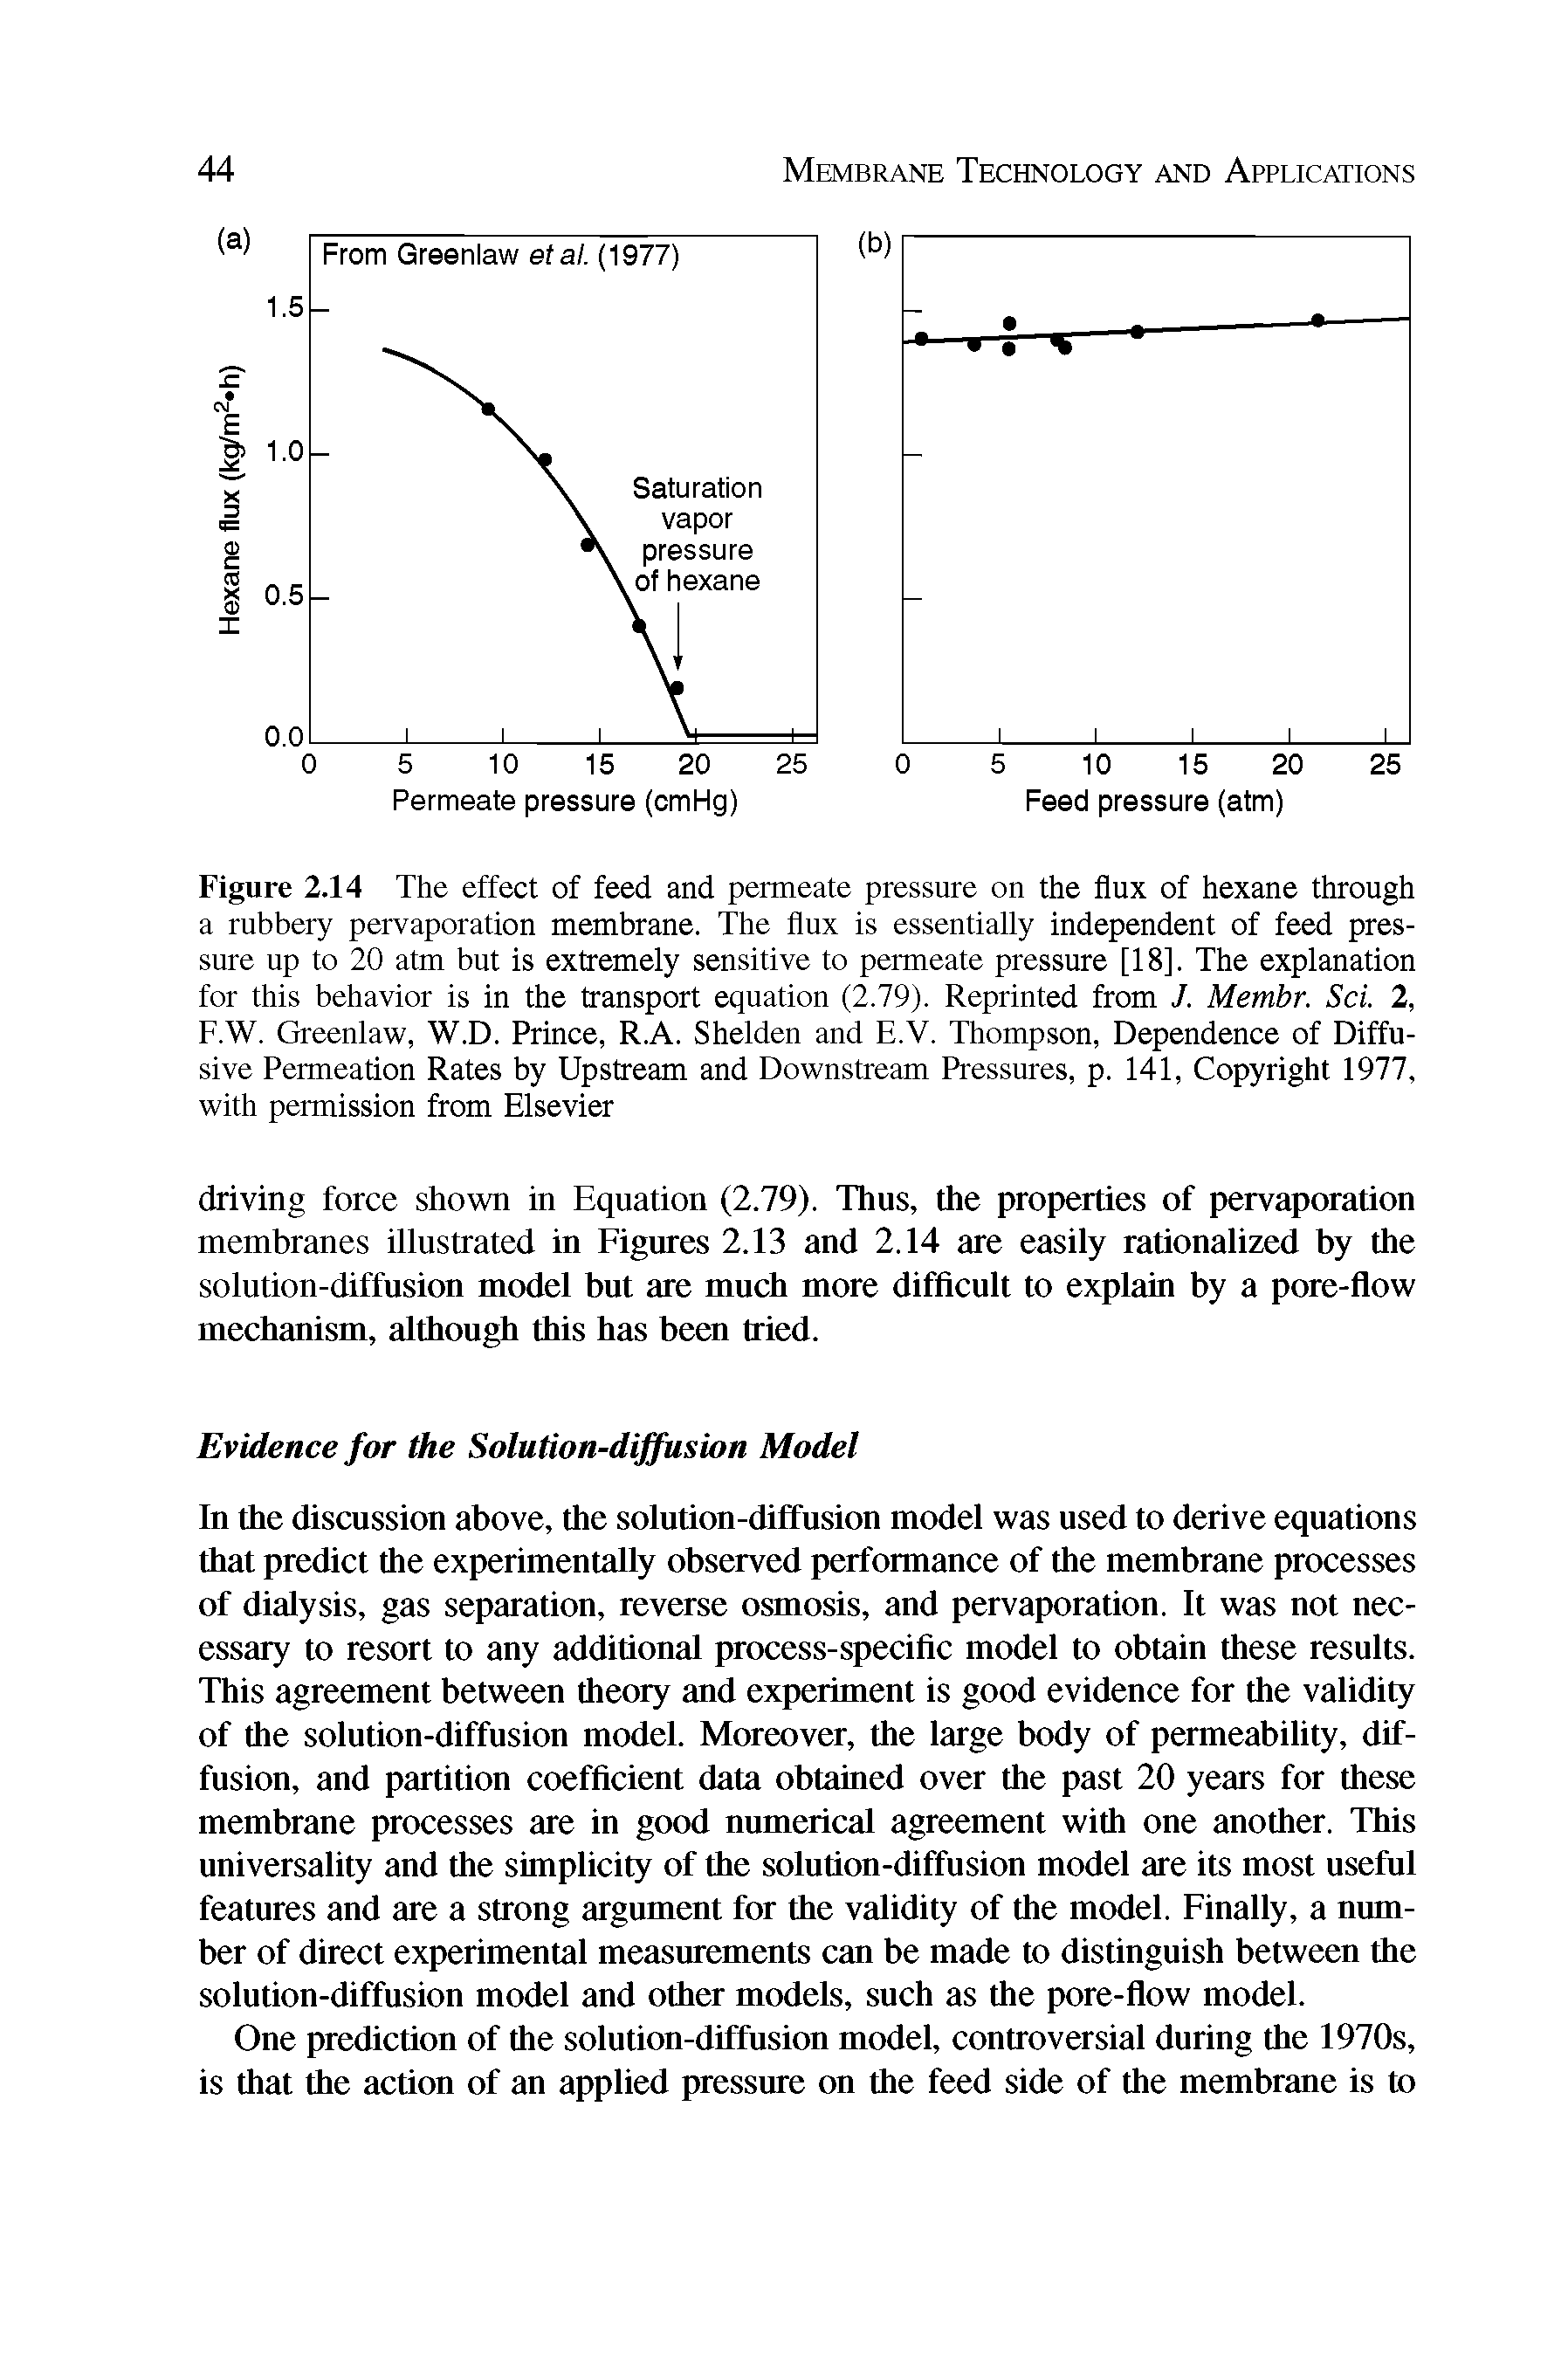 Figure 2.14 The effect of feed and permeate pressure on the flux of hexane through a rubbery pervaporation membrane. The flux is essentially independent of feed pressure up to 20 atm but is extremely sensitive to permeate pressure [18]. The explanation for this behavior is in the transport equation (2.79). Reprinted from J. Membr. Sci. 2, F.W. Greenlaw, W.D. Prince, R.A. Shelden and E.V. Thompson, Dependence of Diffusive Permeation Rates by Upstream and Downstream Pressures, p. 141, Copyright 1977, with permission from Elsevier...